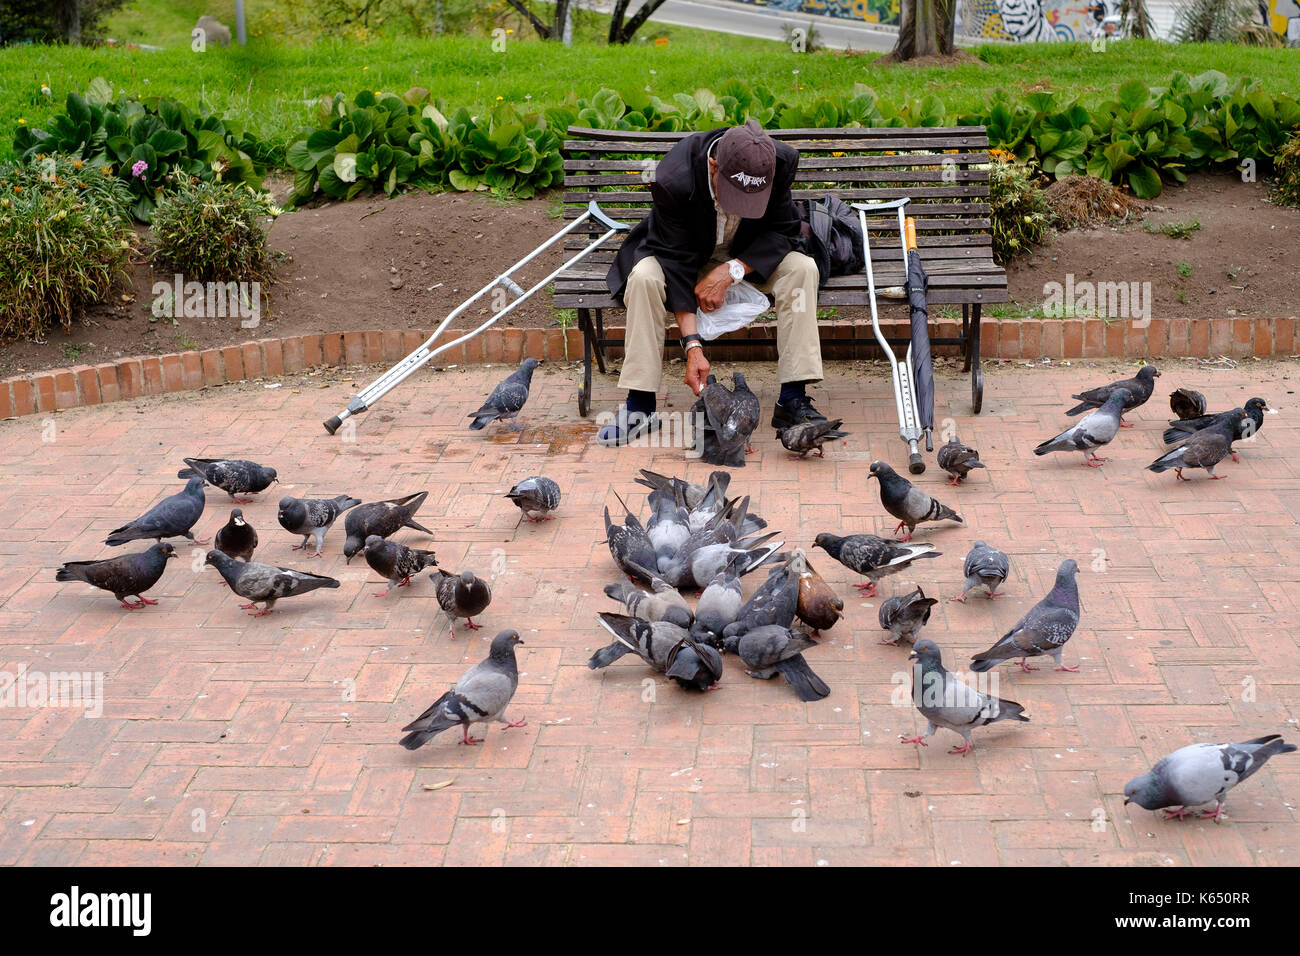 Colombia: Bogota. Old disabled man, alone with his crutches, sitting on a bench, feeding pigeons in the San Diego Park (Parque publico San Diego) Stock Photo